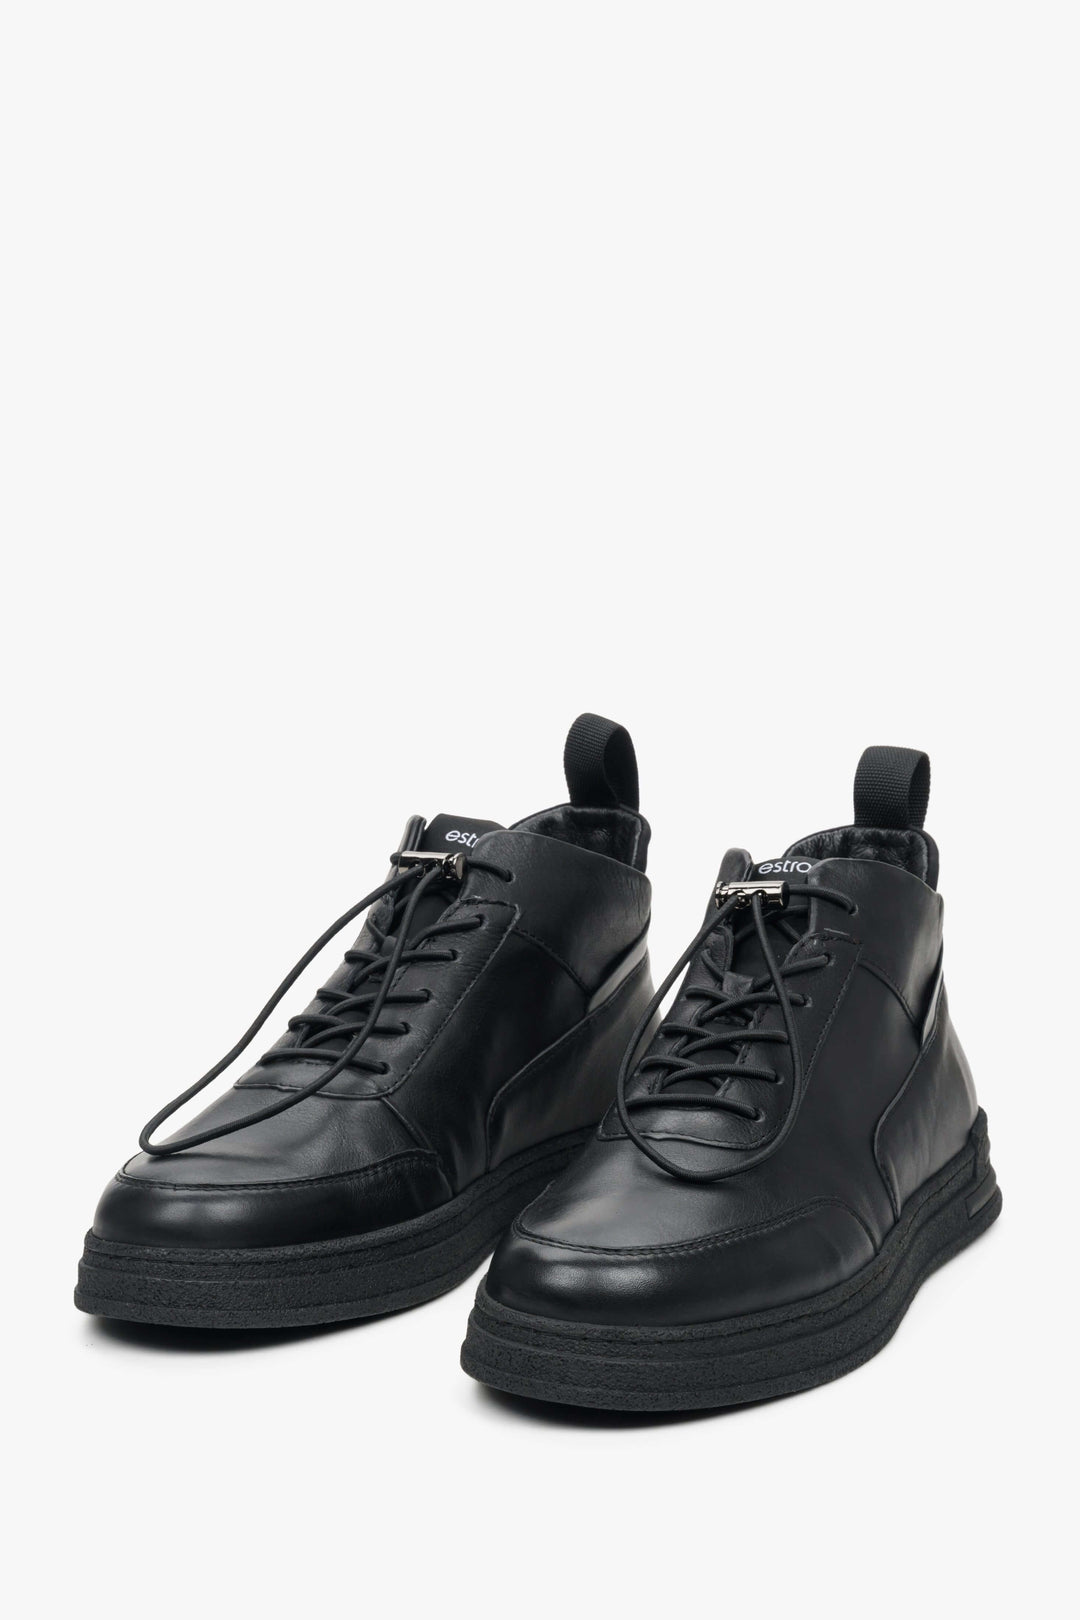 Men's high-top black leather sneakers for fall - presentation of a shoe toe and sideline.